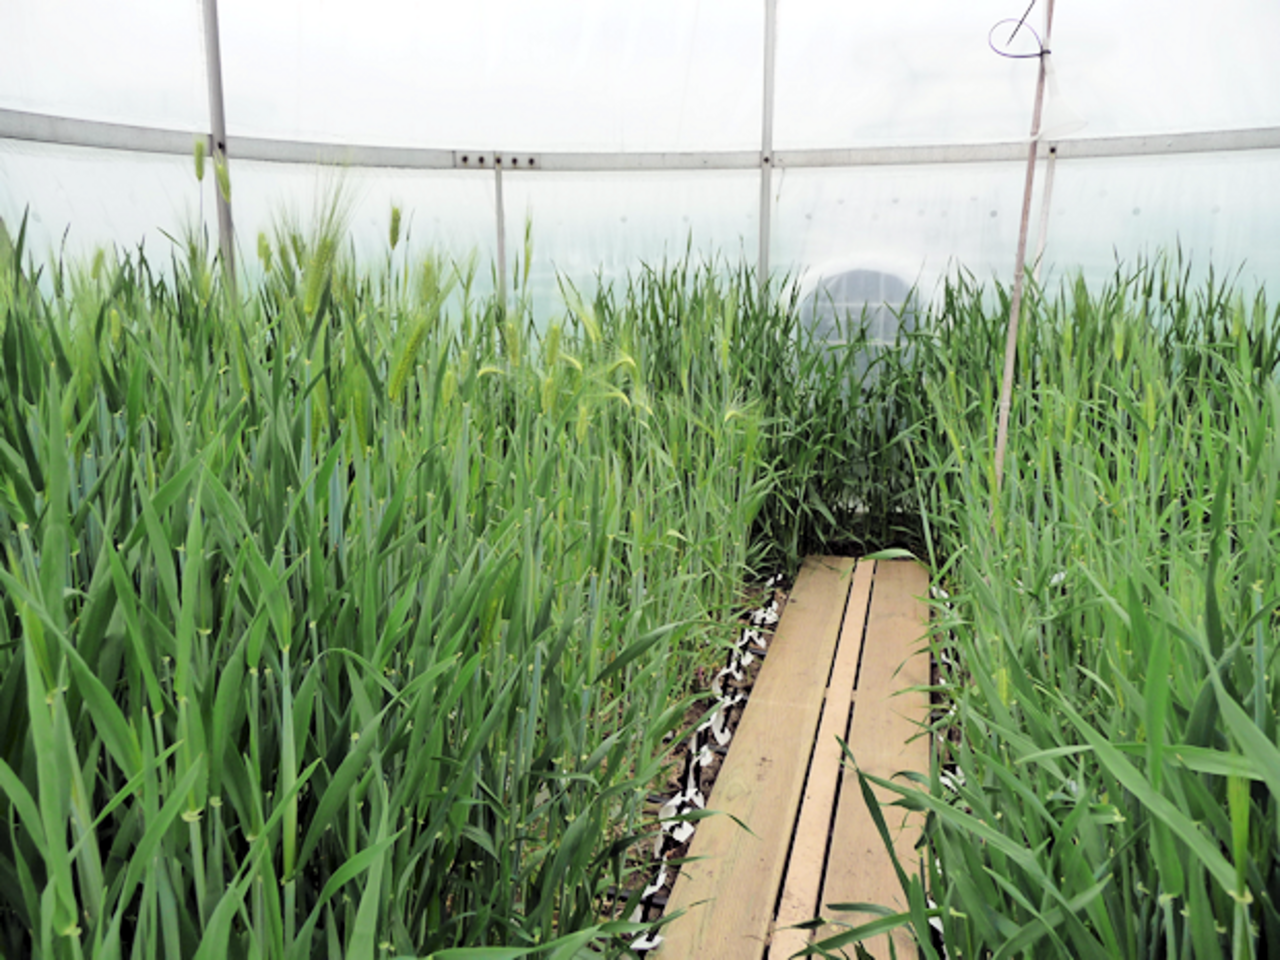 Different barley genotypes exposed to elevated CO2